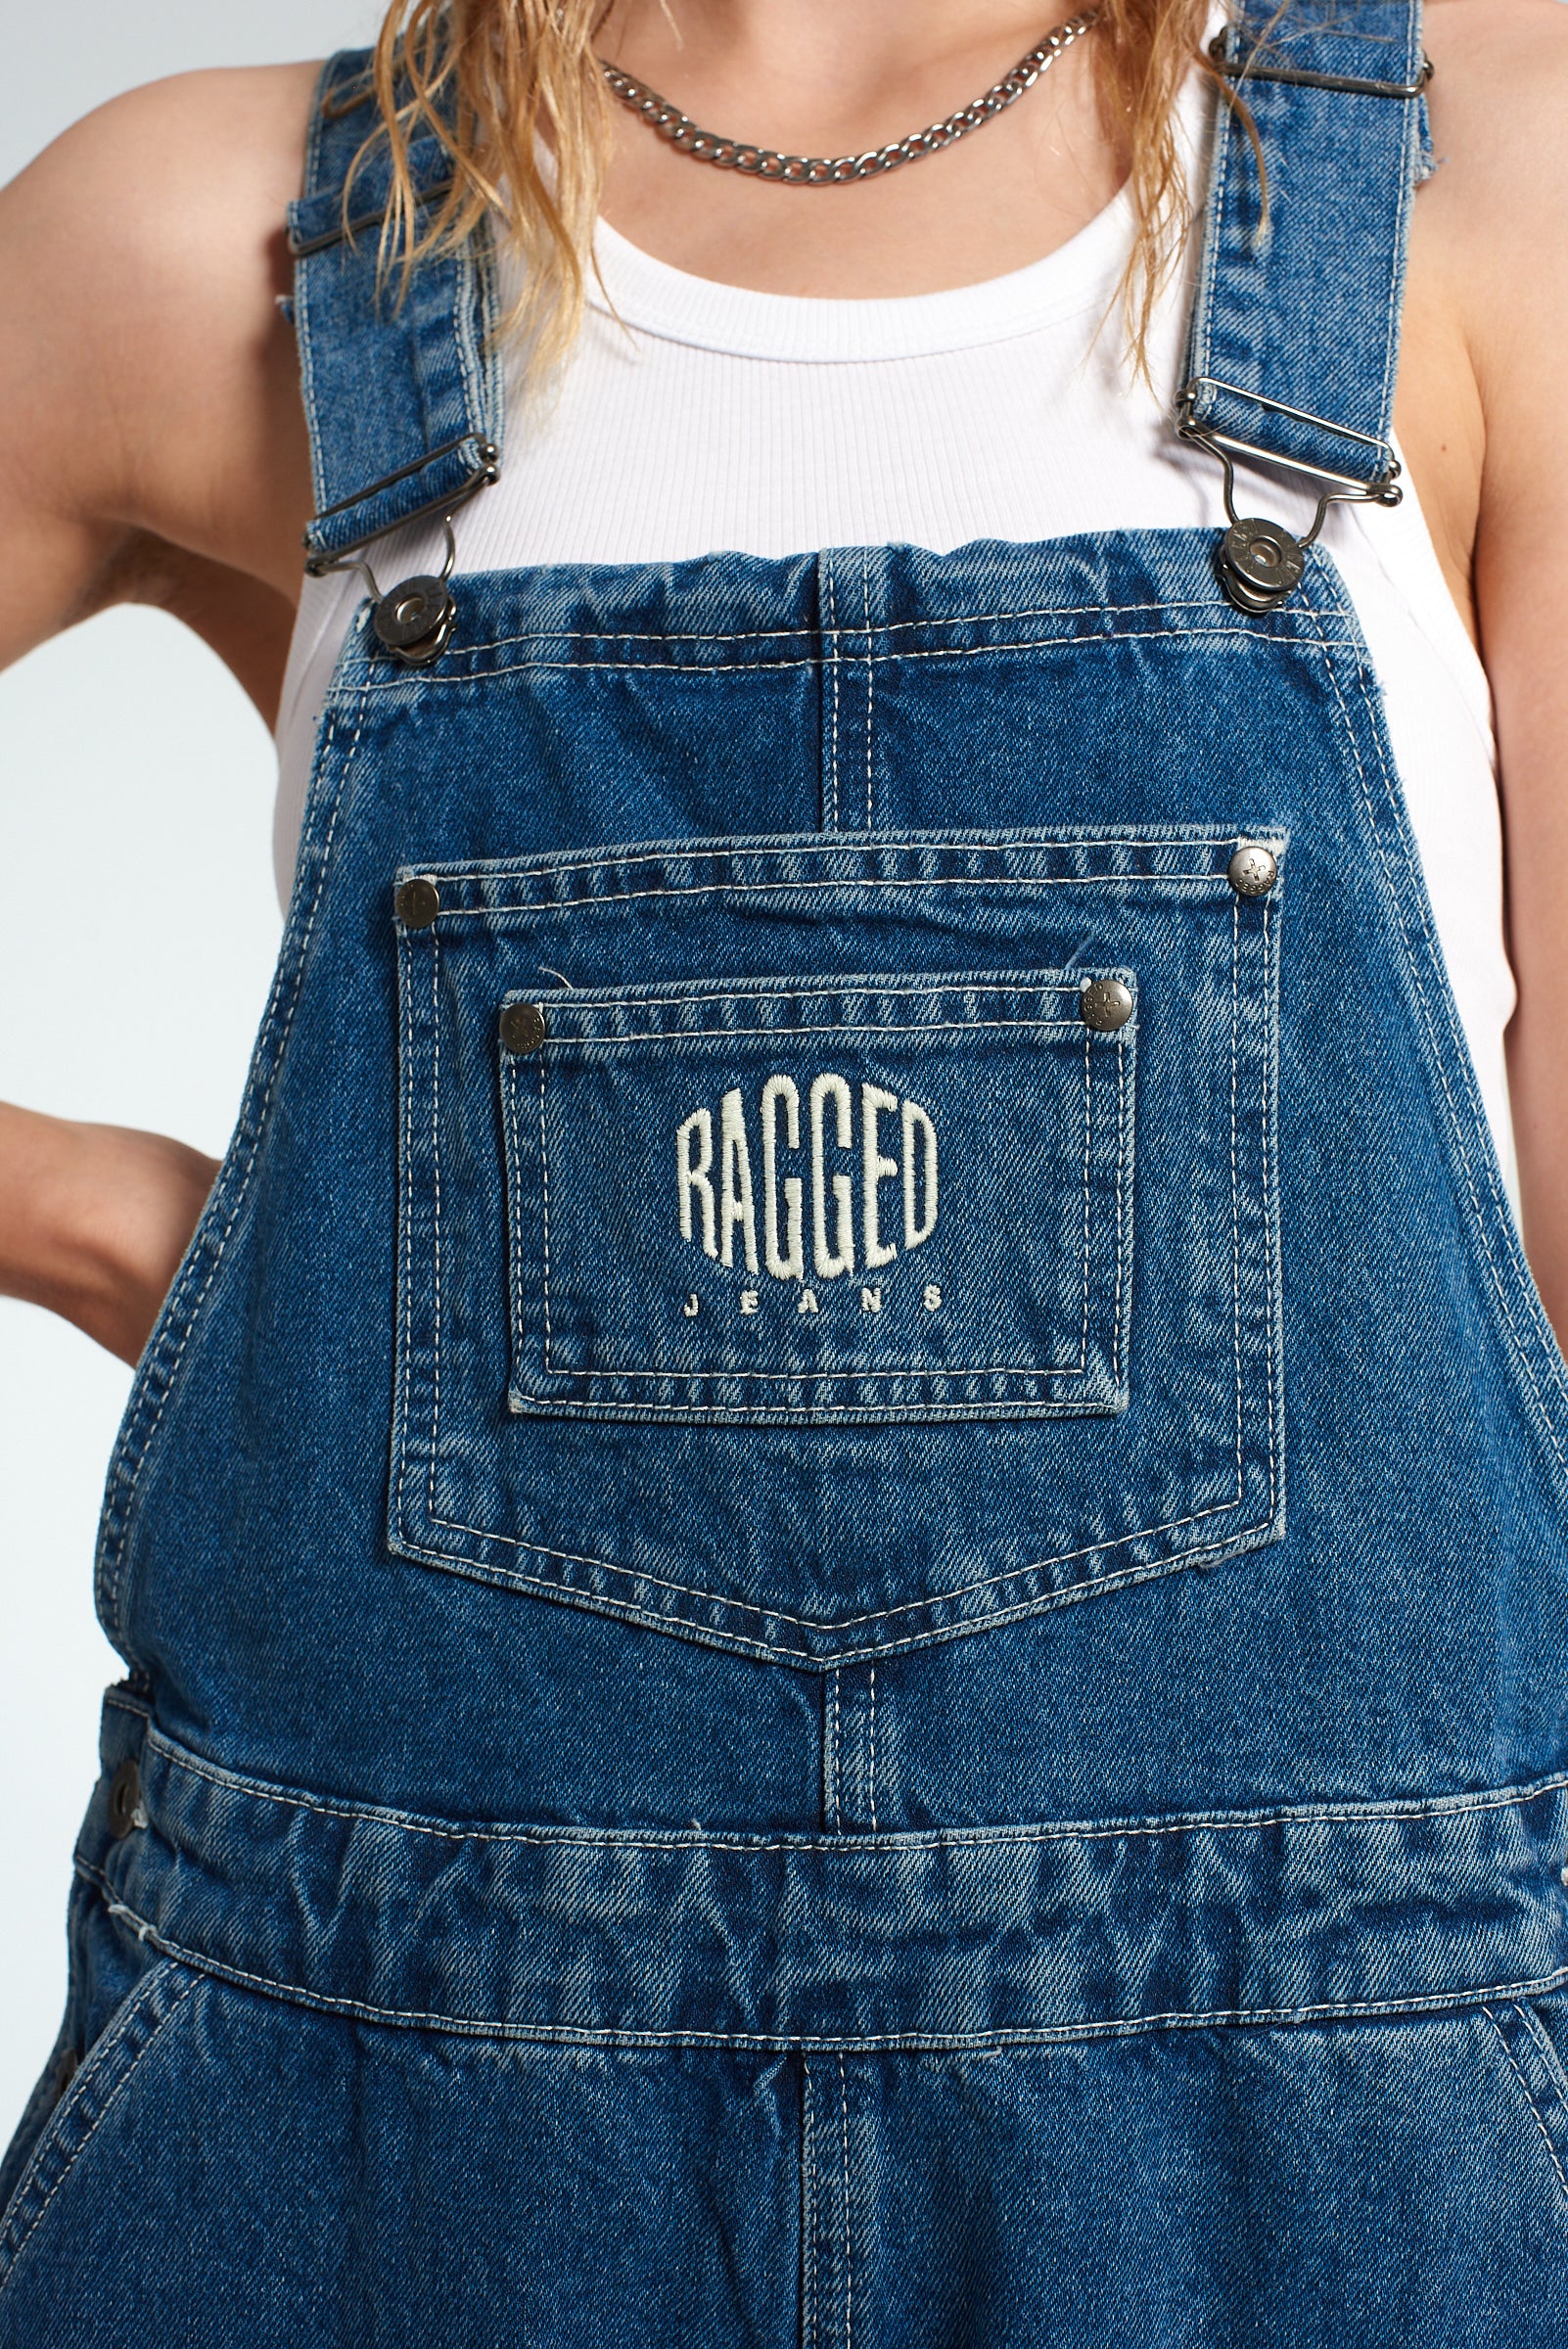 Discover more than 216 blue denim dungarees women best